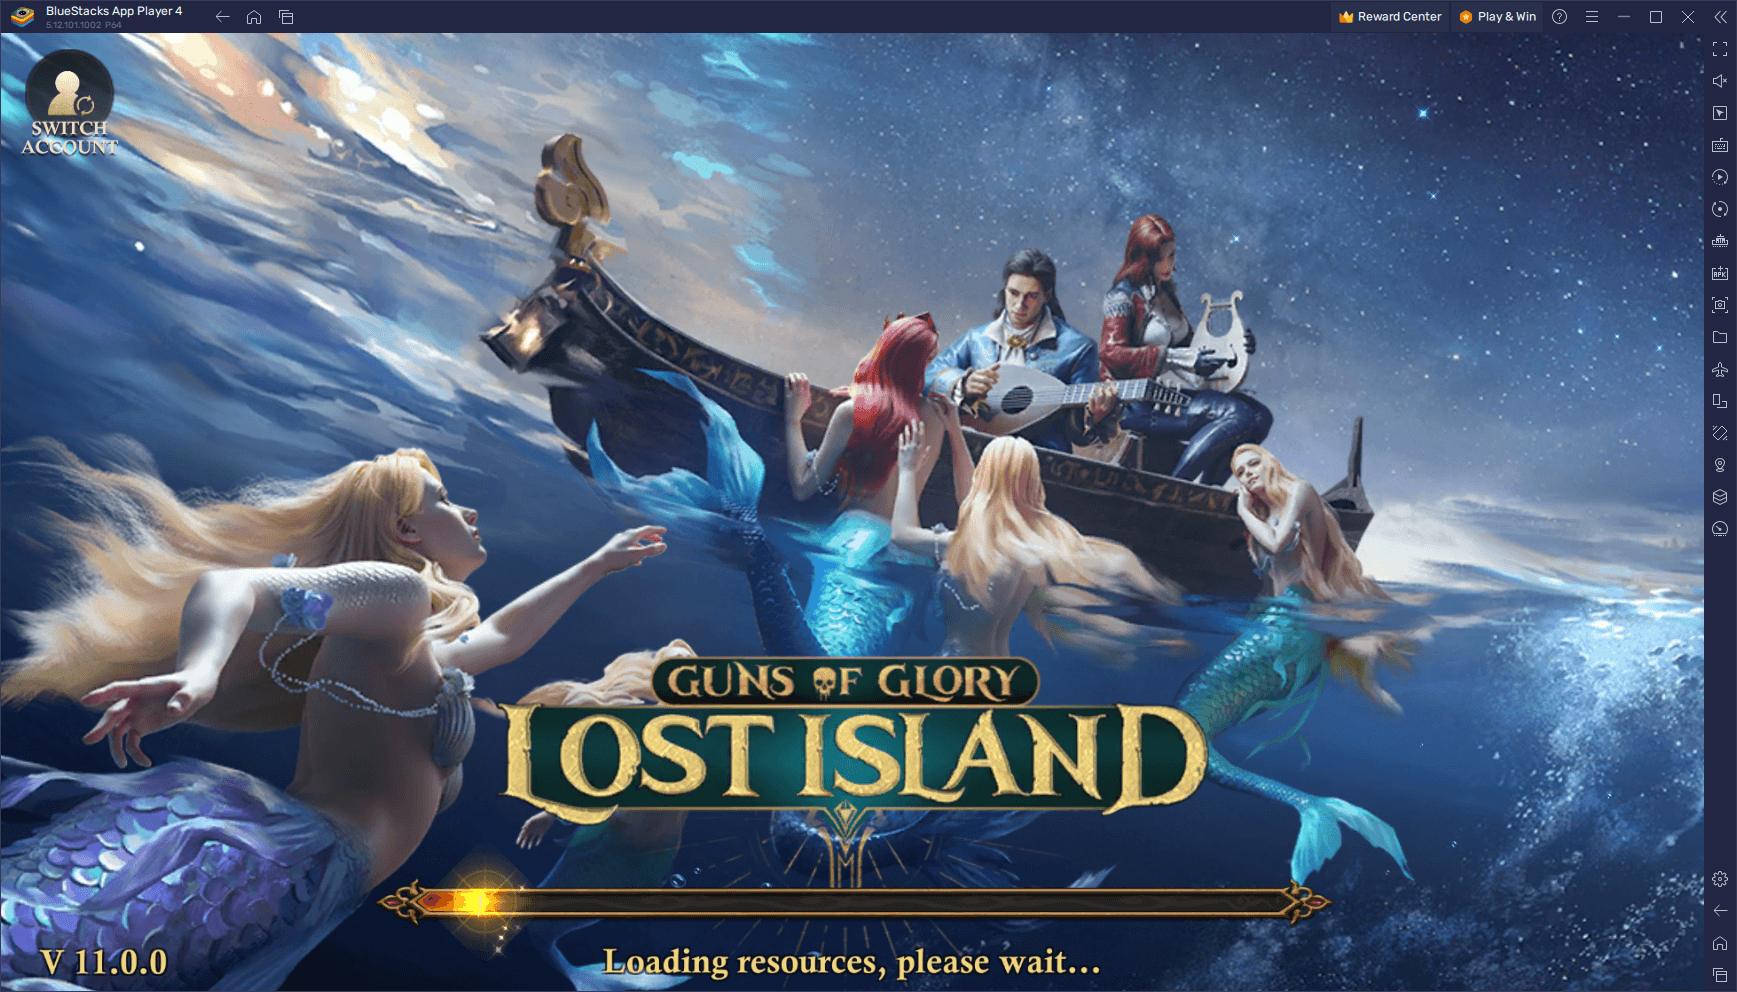 Play Guns of Glory Online on  - Play This Conquest Game on the Cloud  with